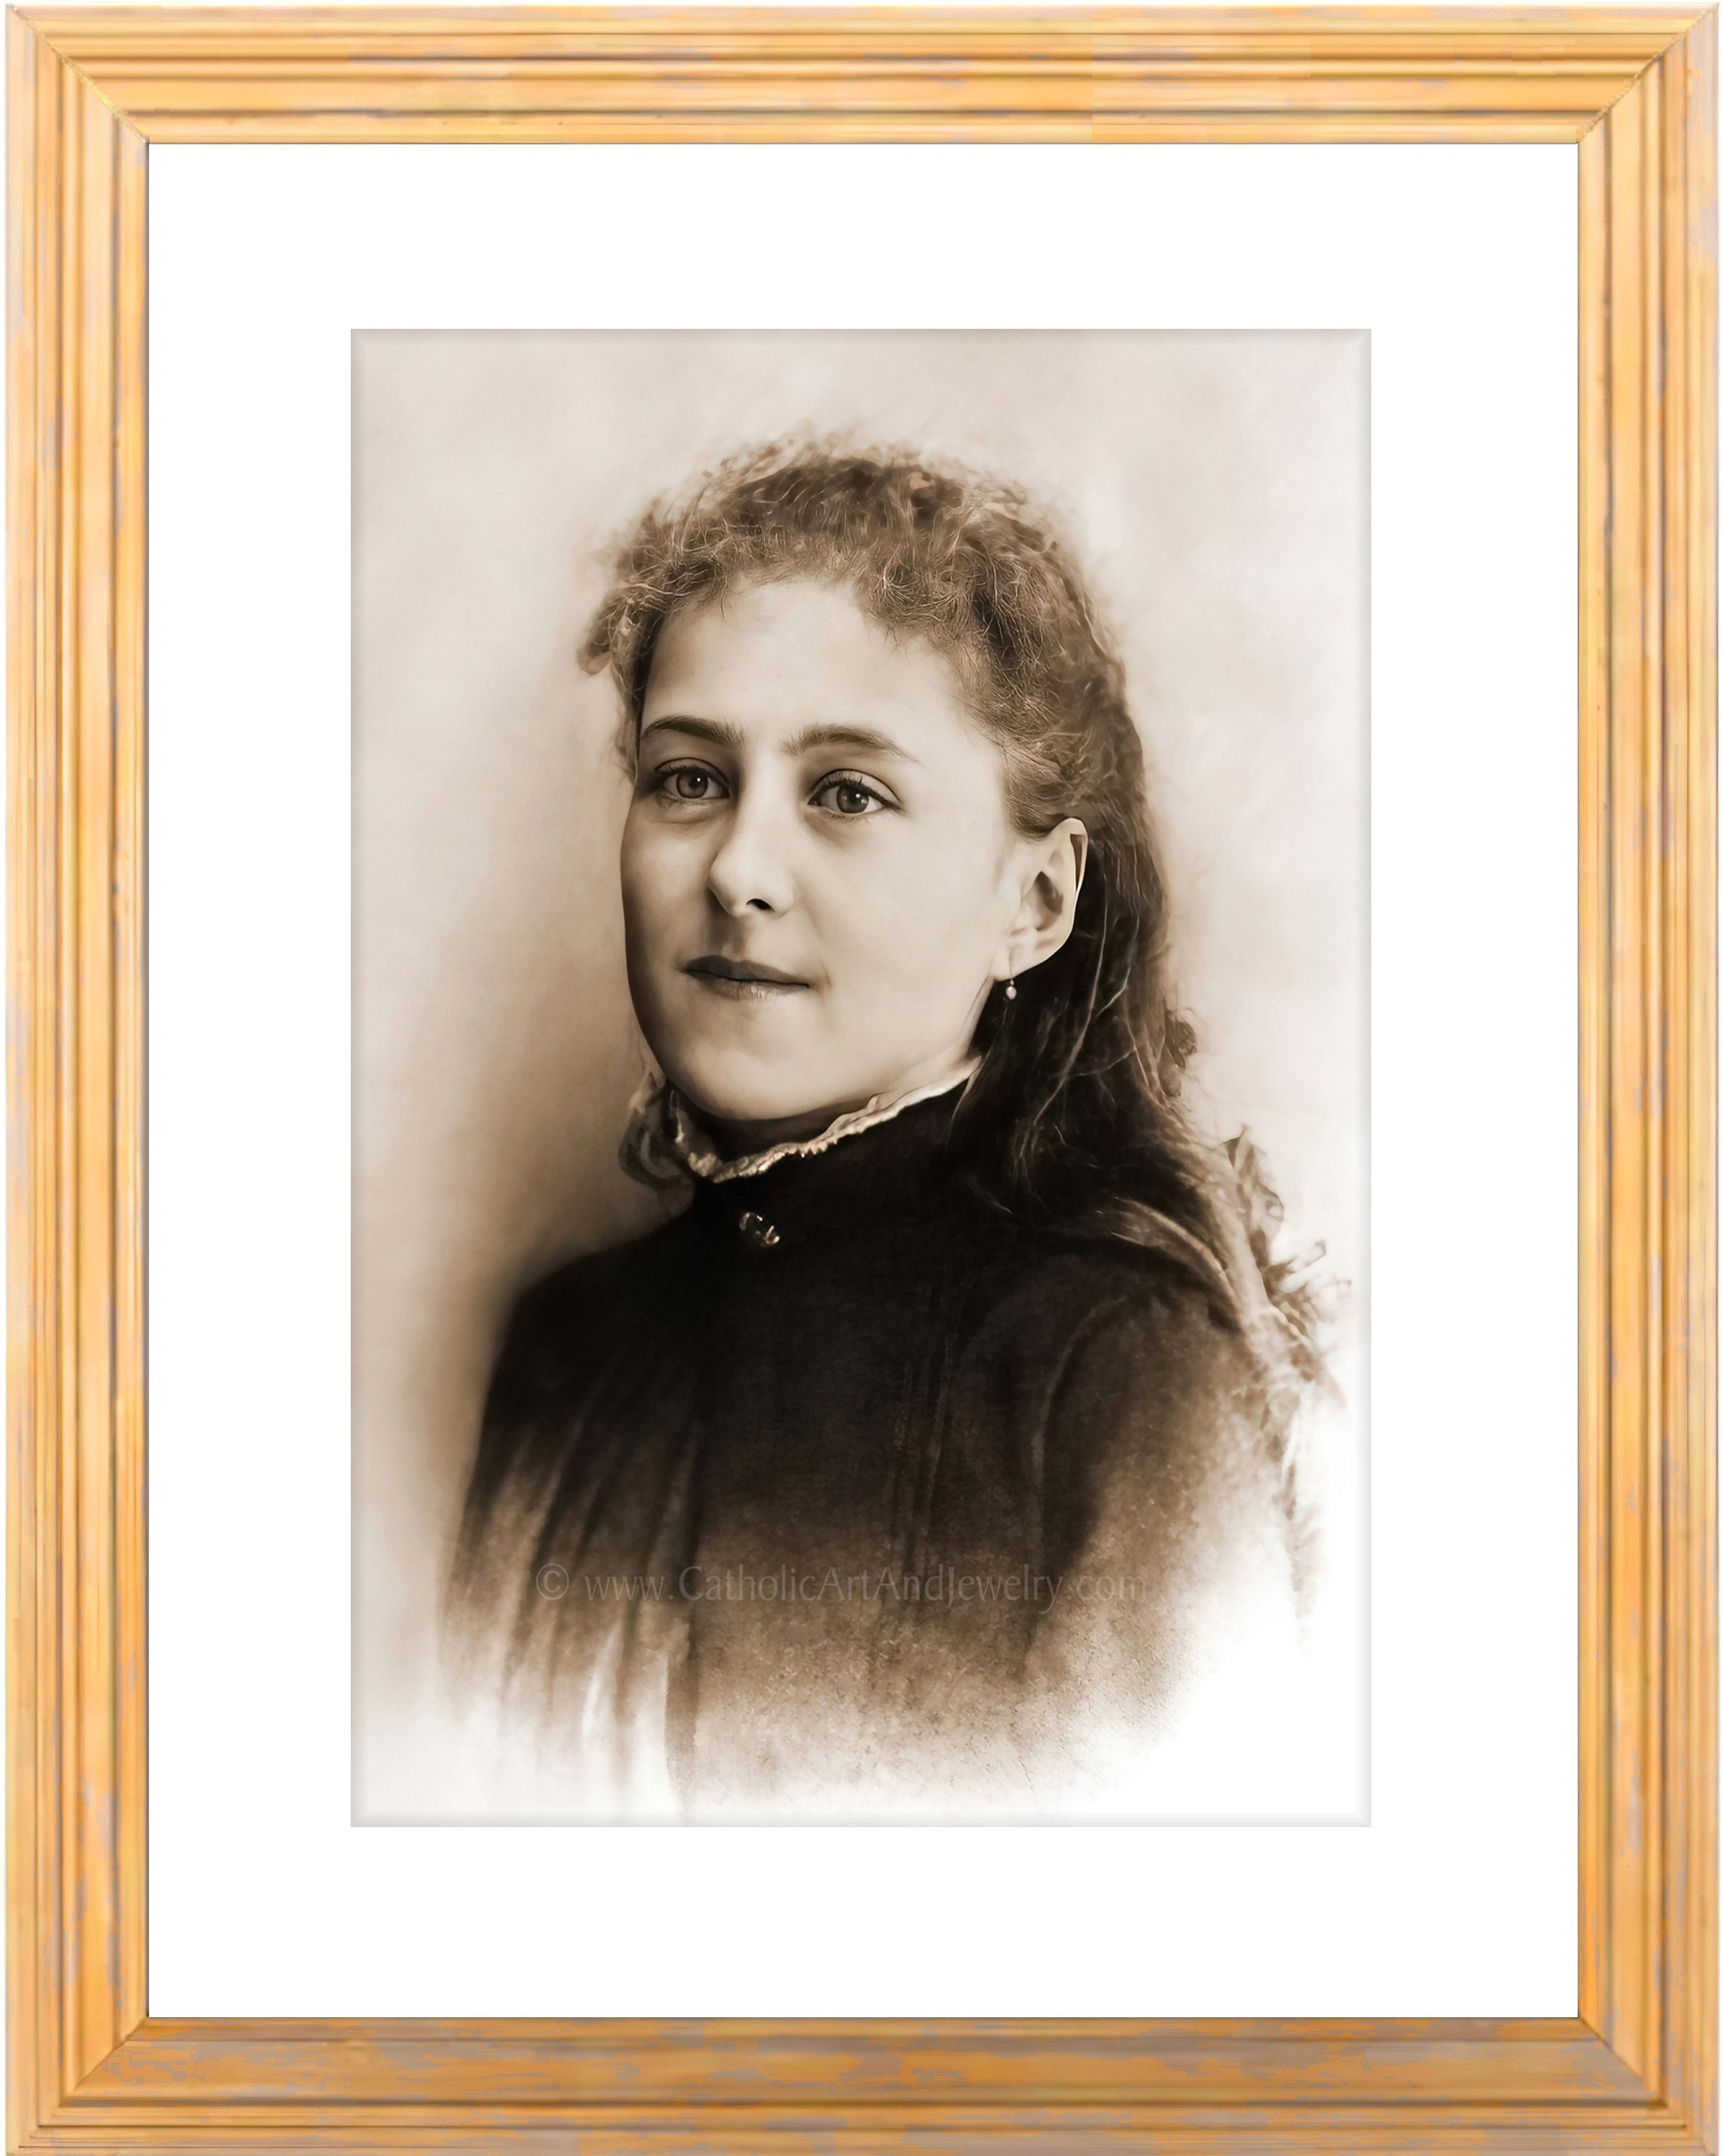 St. Therese Exclusive Restoration Vivid Photo 2 Sizes - Etsy